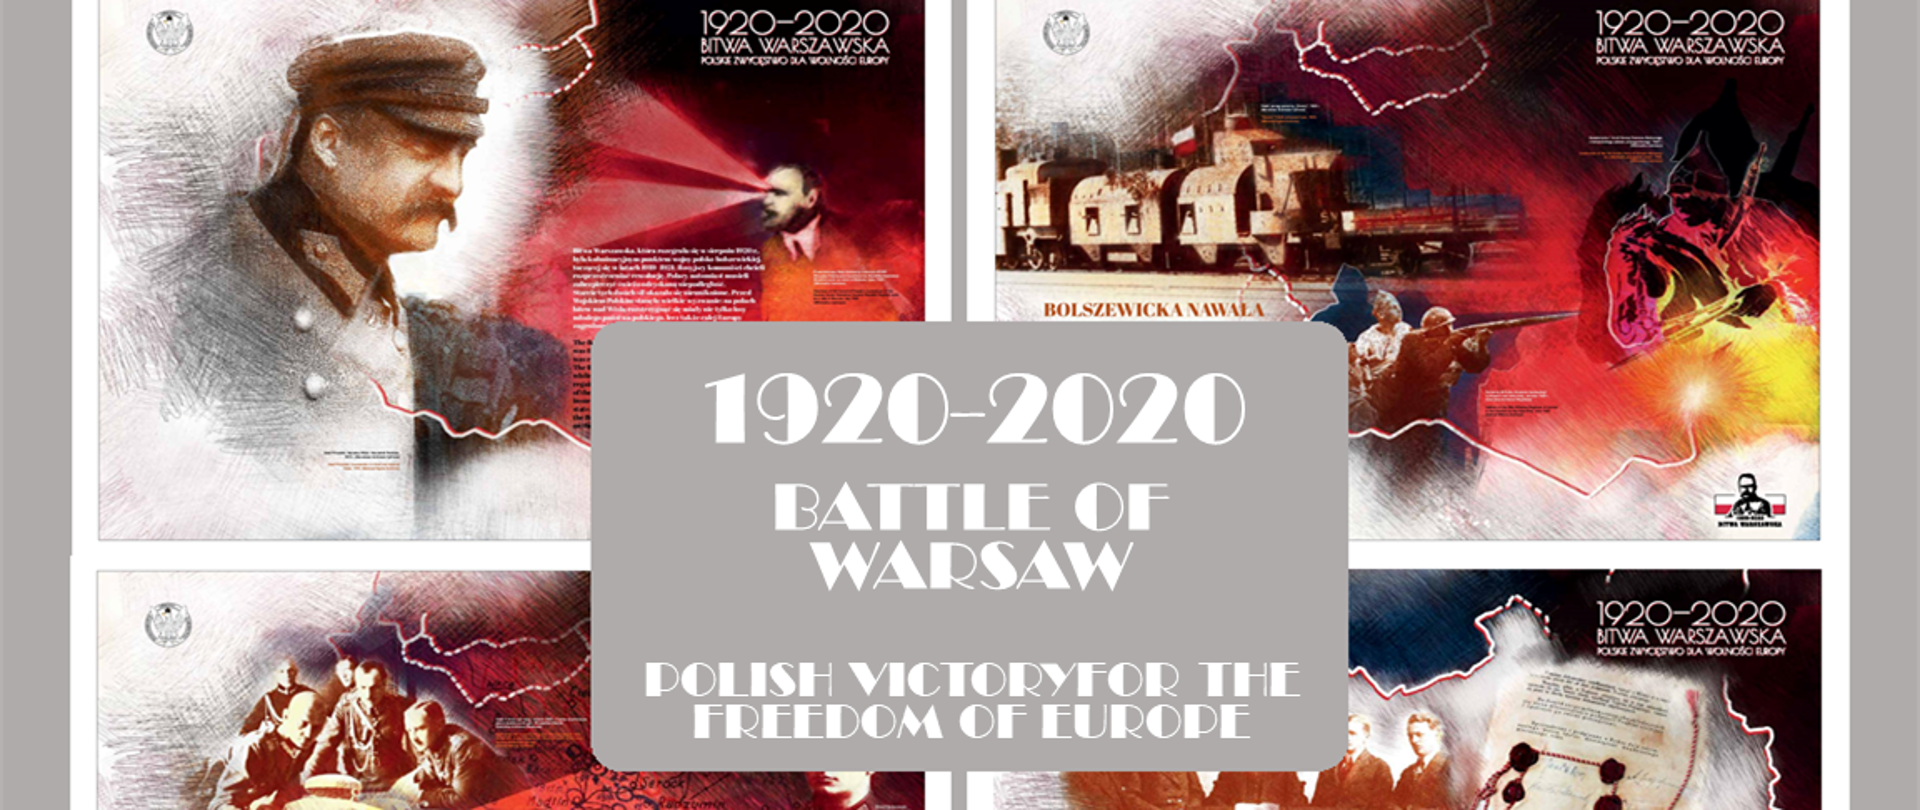 Battle of Warsaw - commemoration in The Hague 15.08